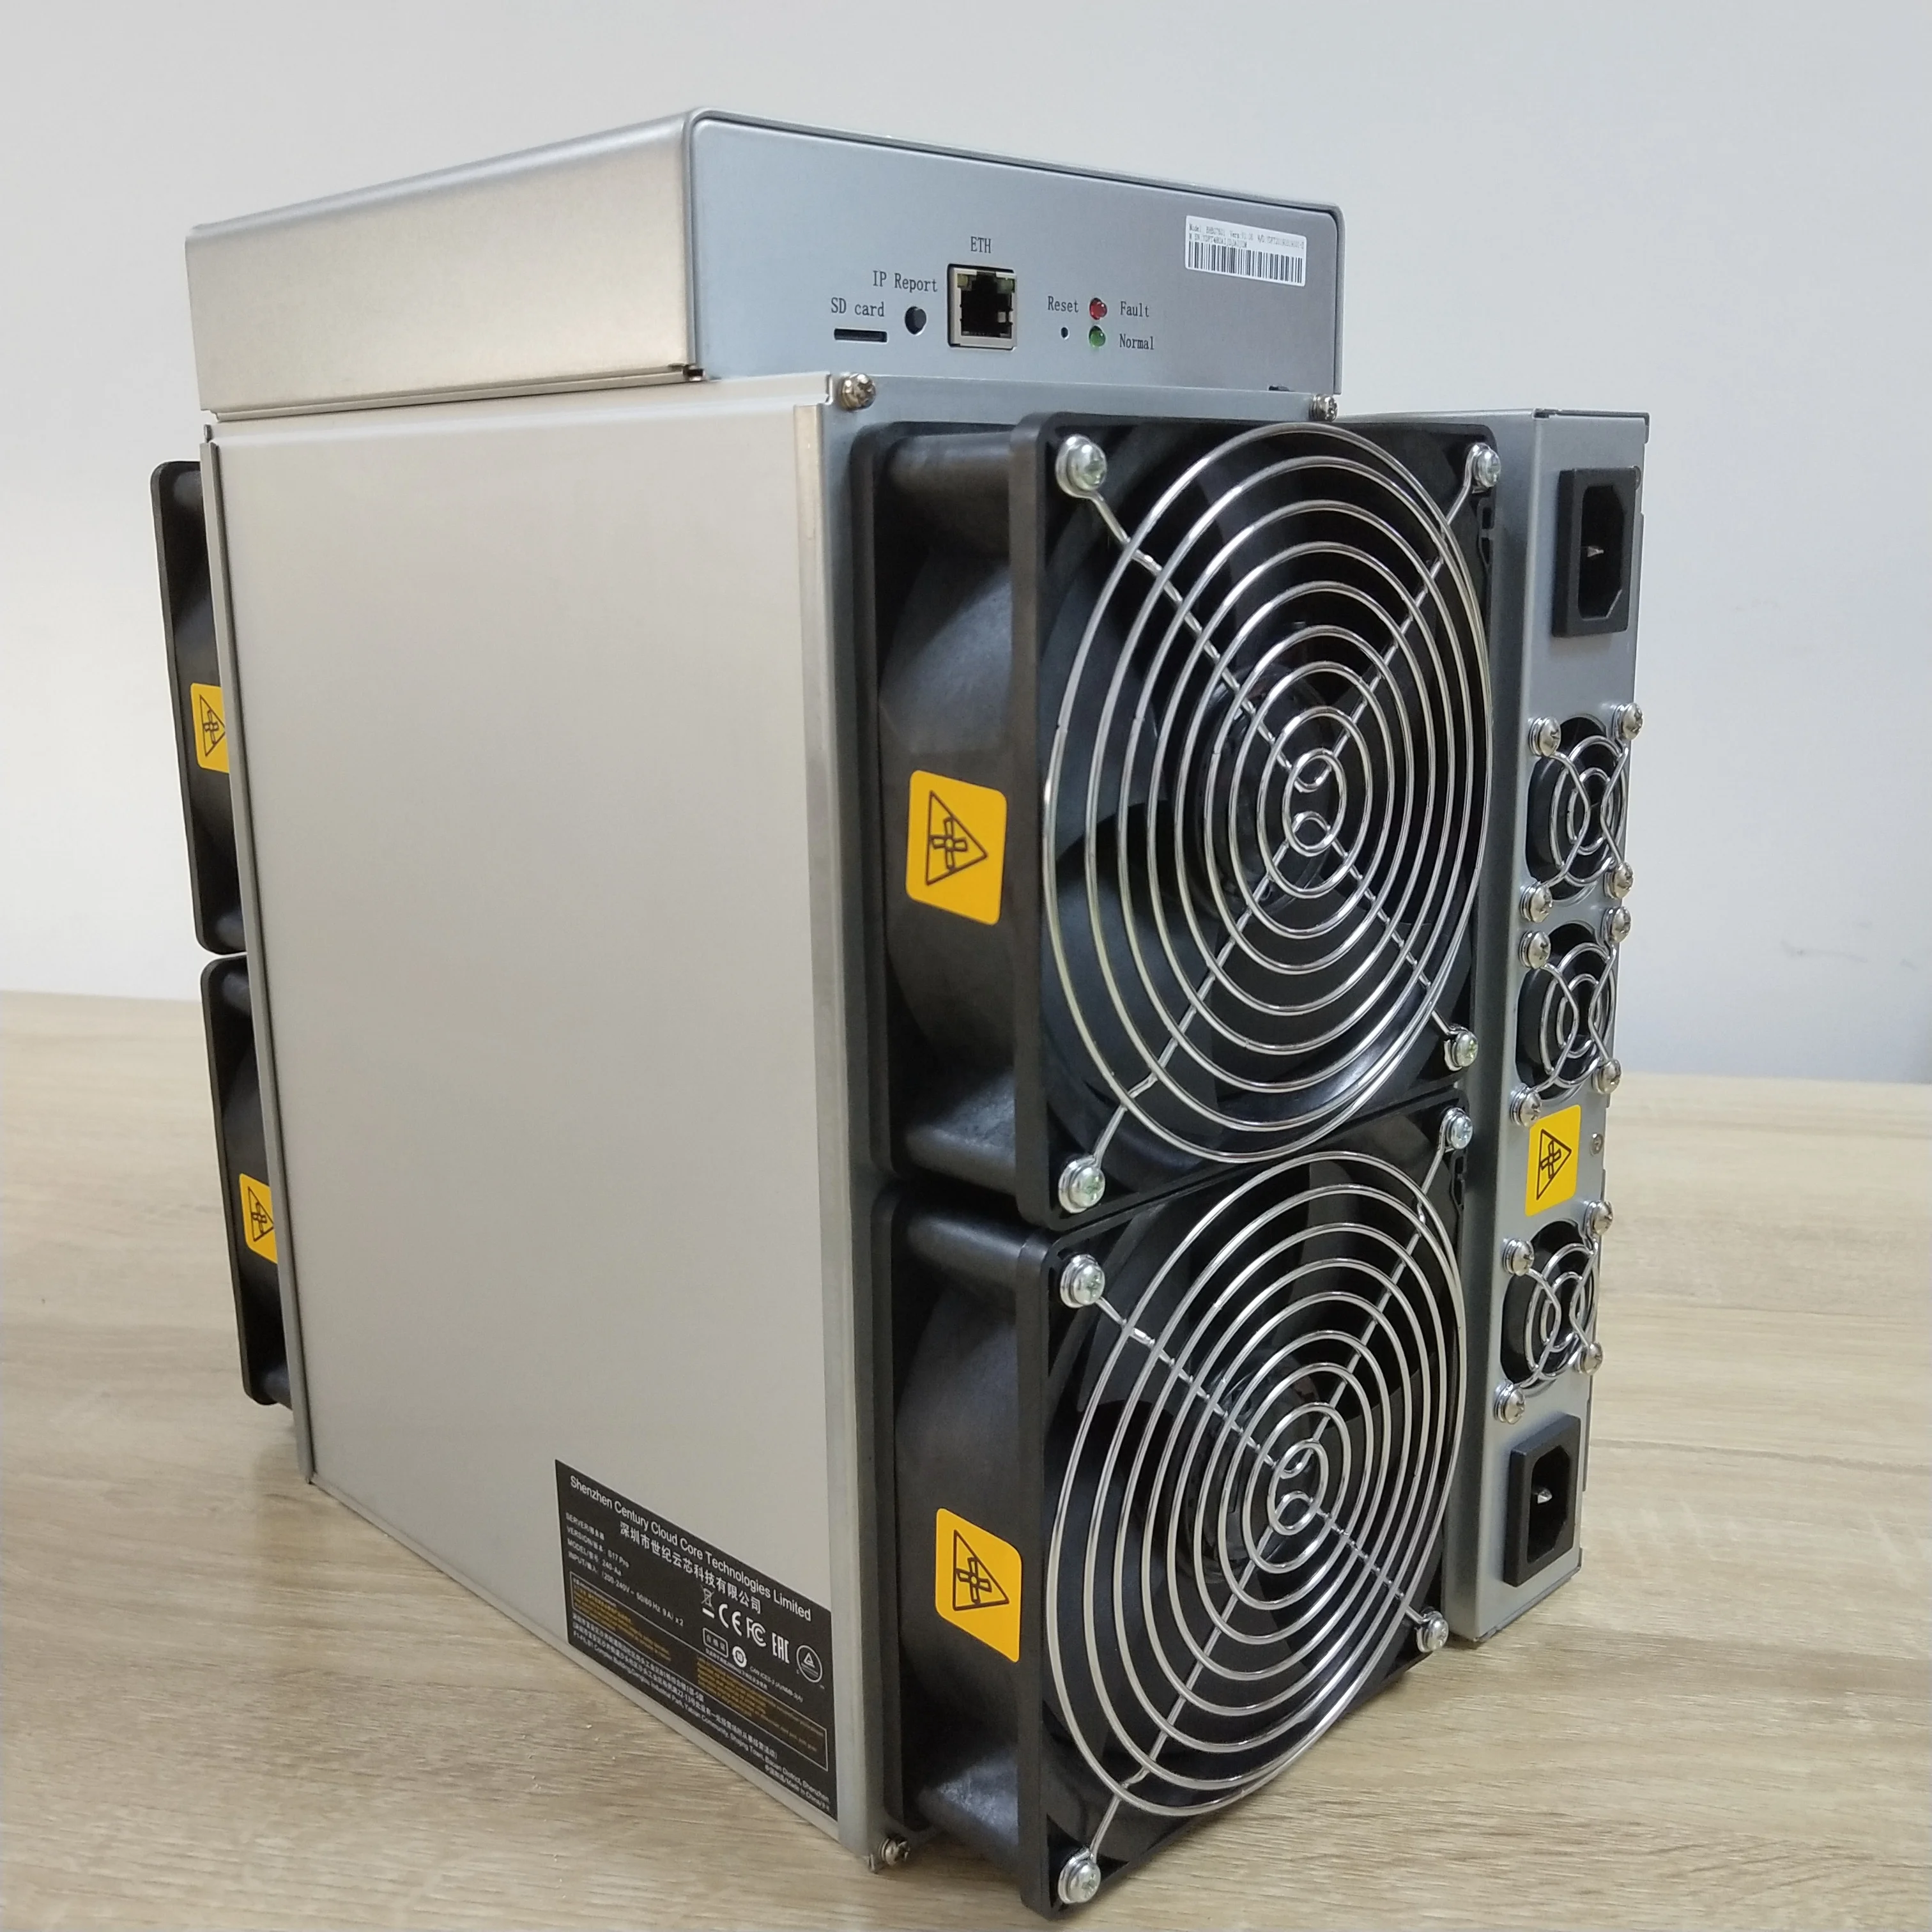 Antminer t21 190 th s. Antminer s17 Pro. ASIC s17 Pro. Antminer s17 Pro 50 th/s. ASIC Antminer s17 Pro.